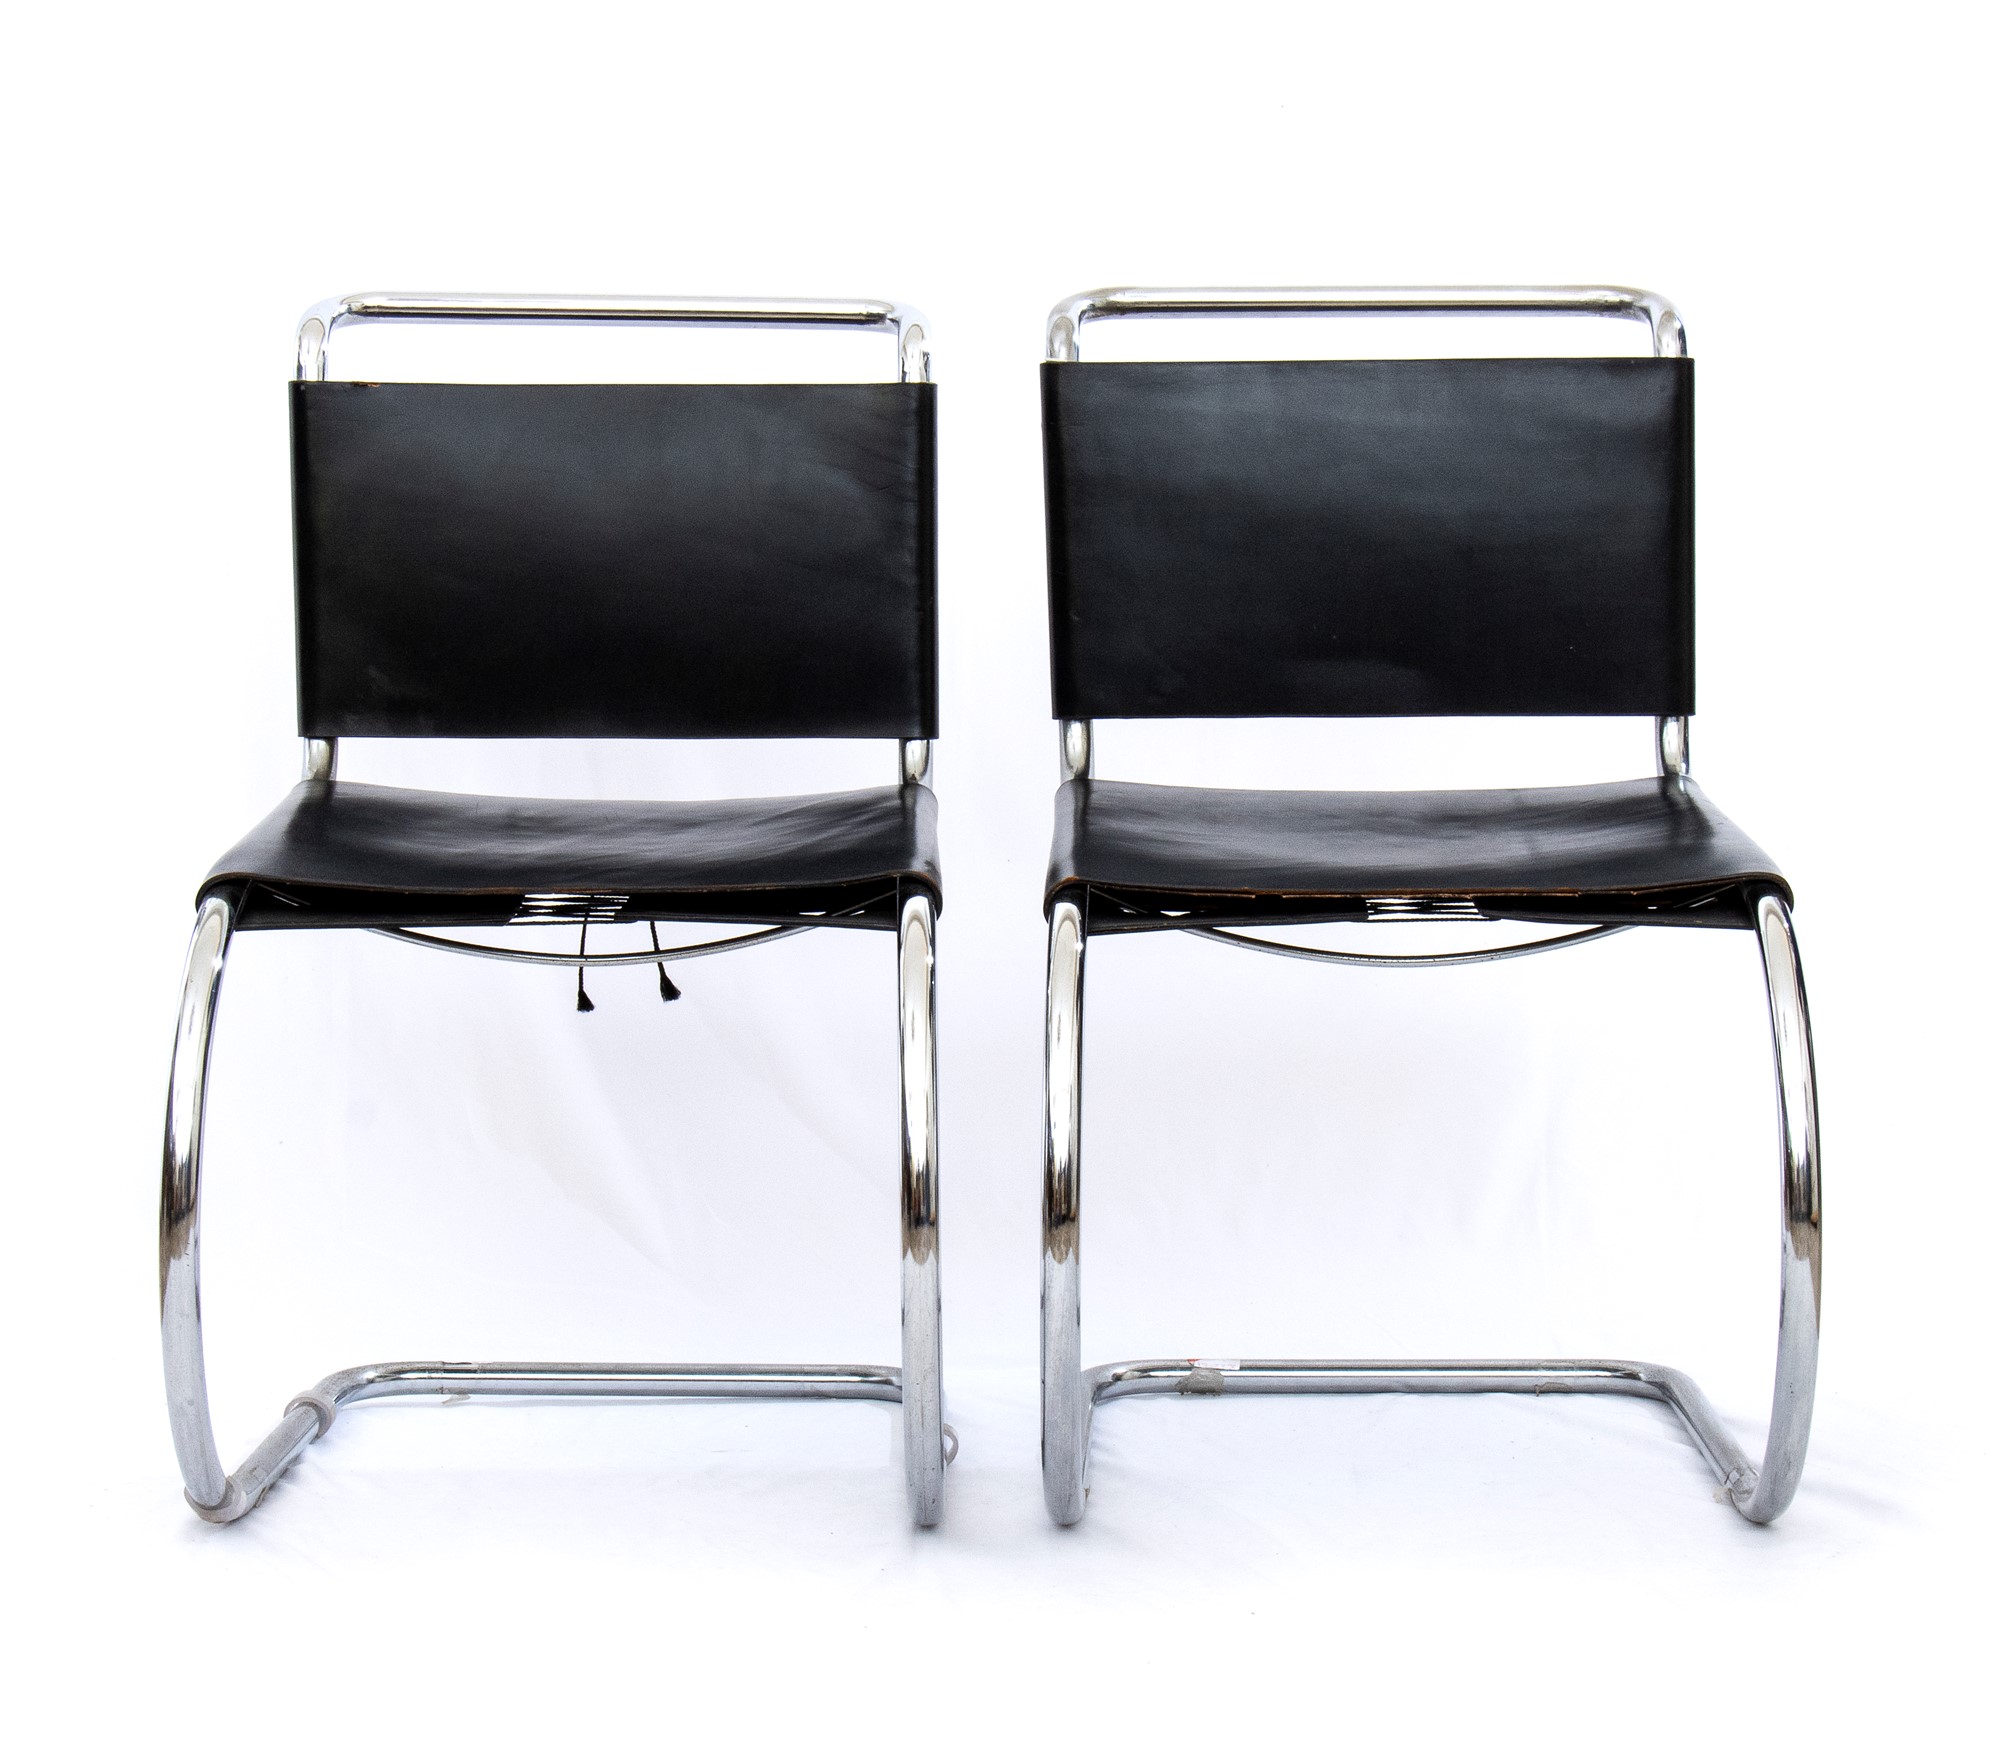 2 chairs in black leather and steel designed by Mart Stam and Marcer Beuer - Image 4 of 19